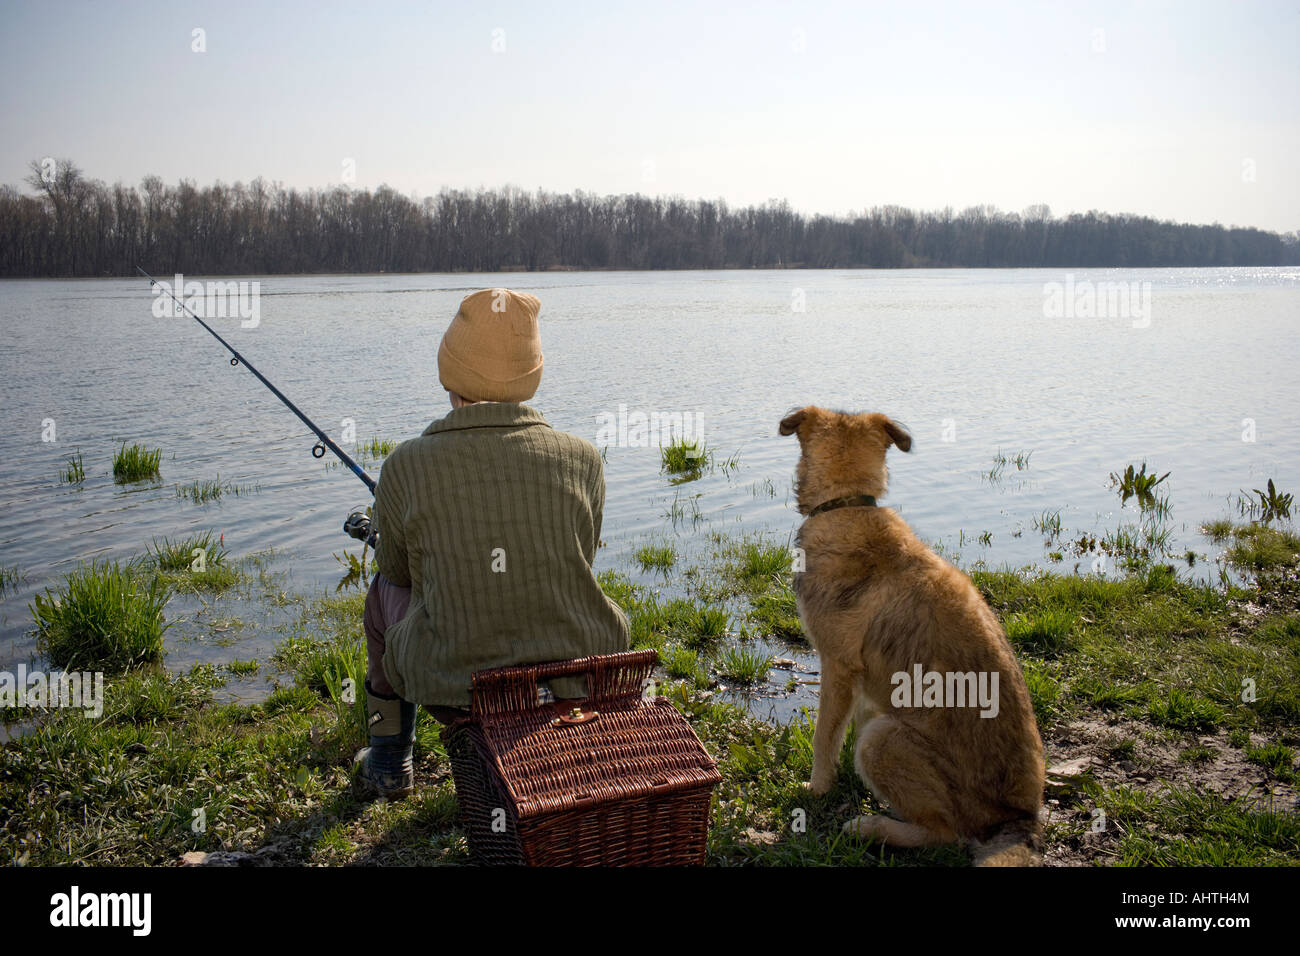 Boy (12-14) fishing by river with pet dog, rear view Stock Photo